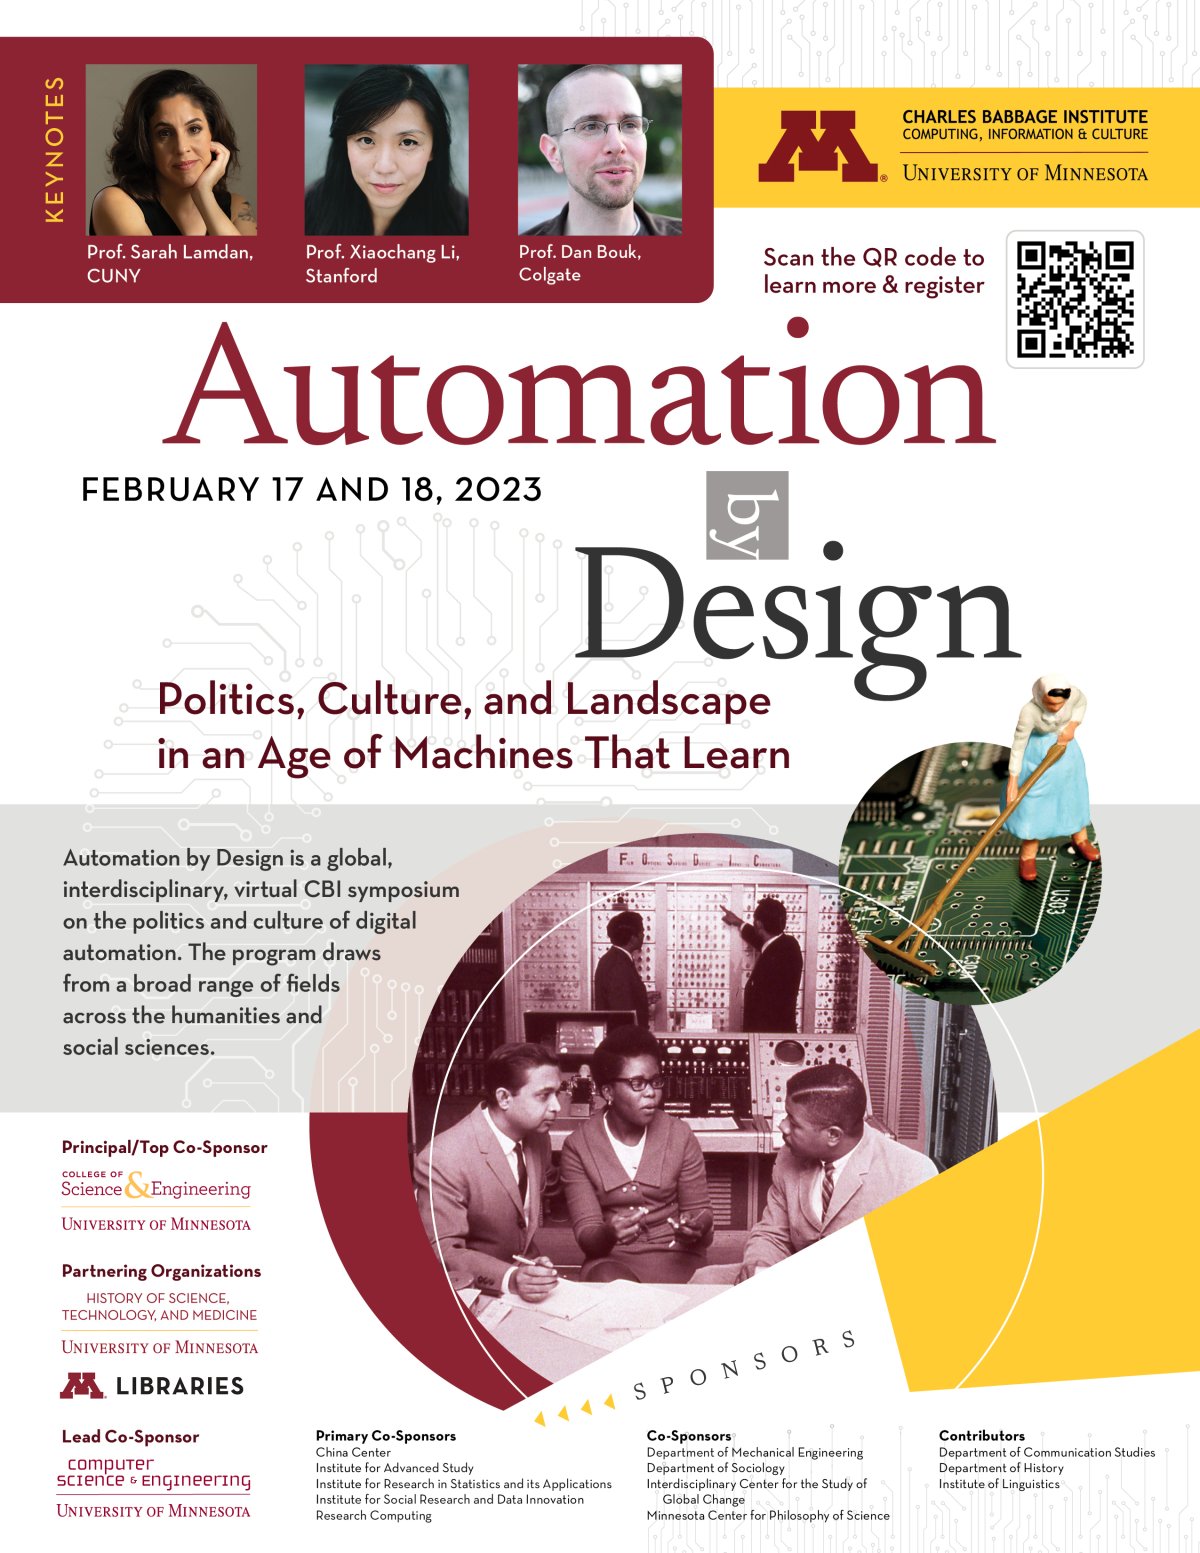 Automation by Design promotional flyer